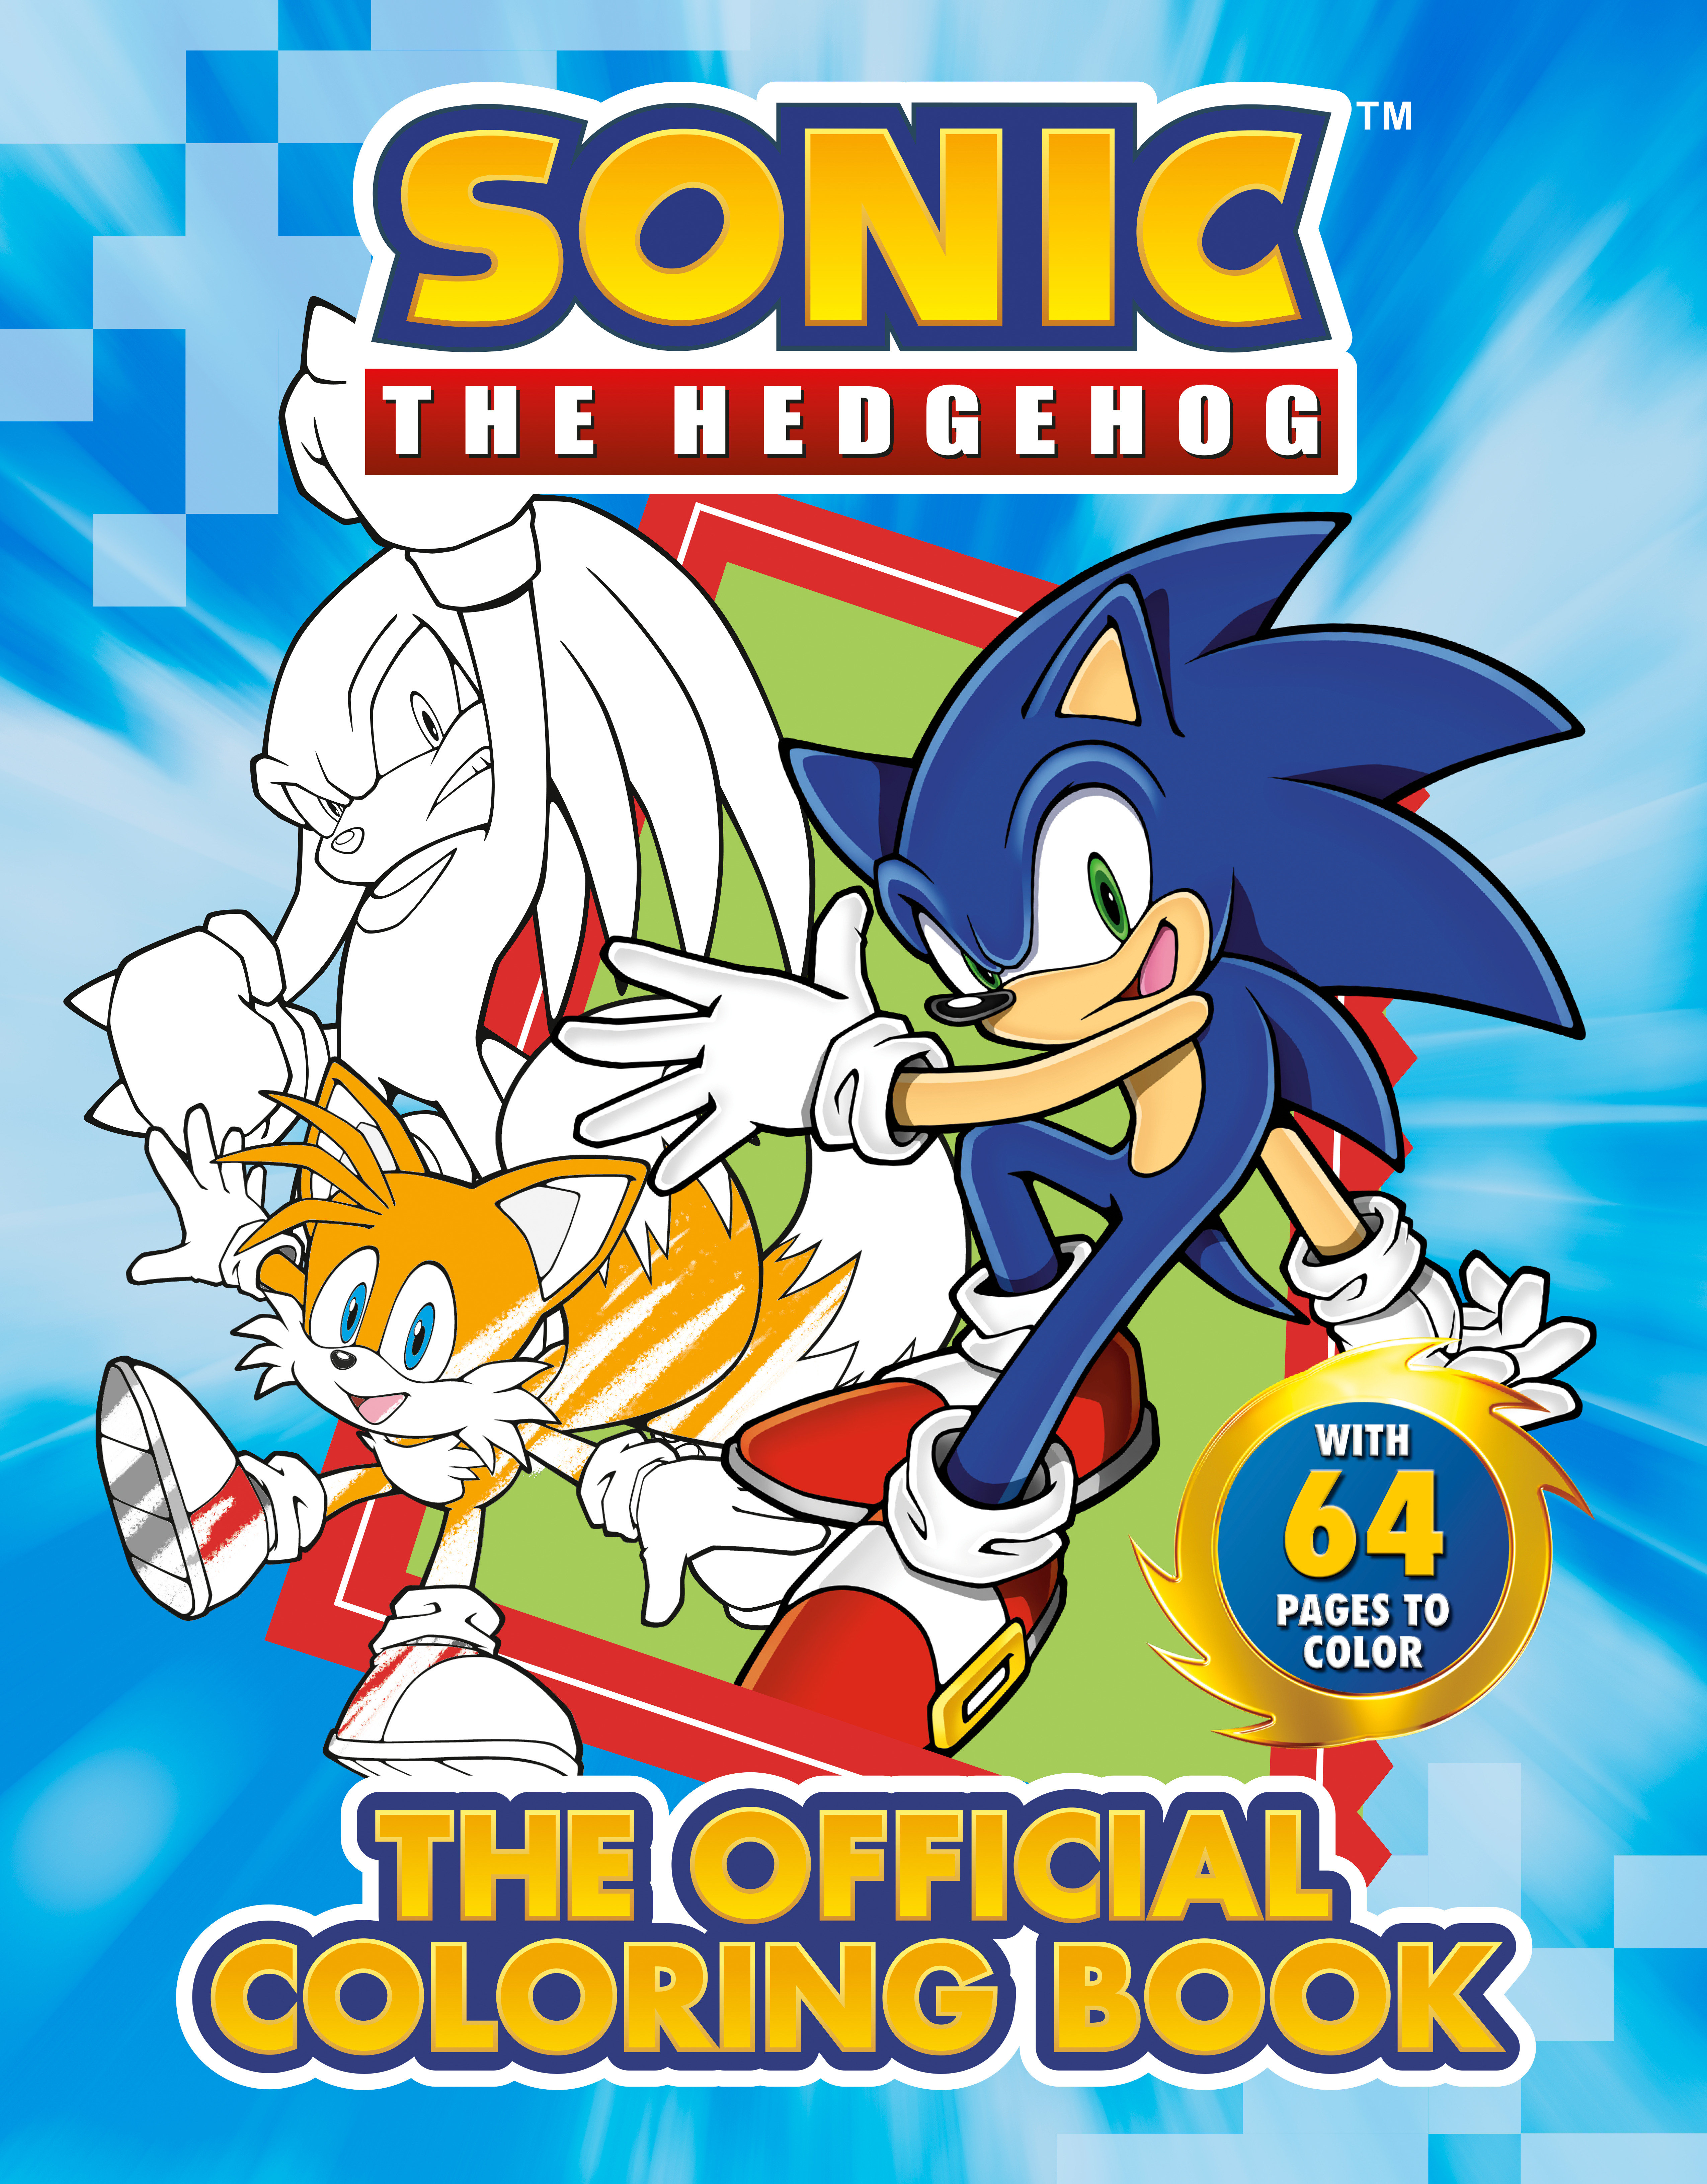 Sonic the Hedgehog Official Coloring Book